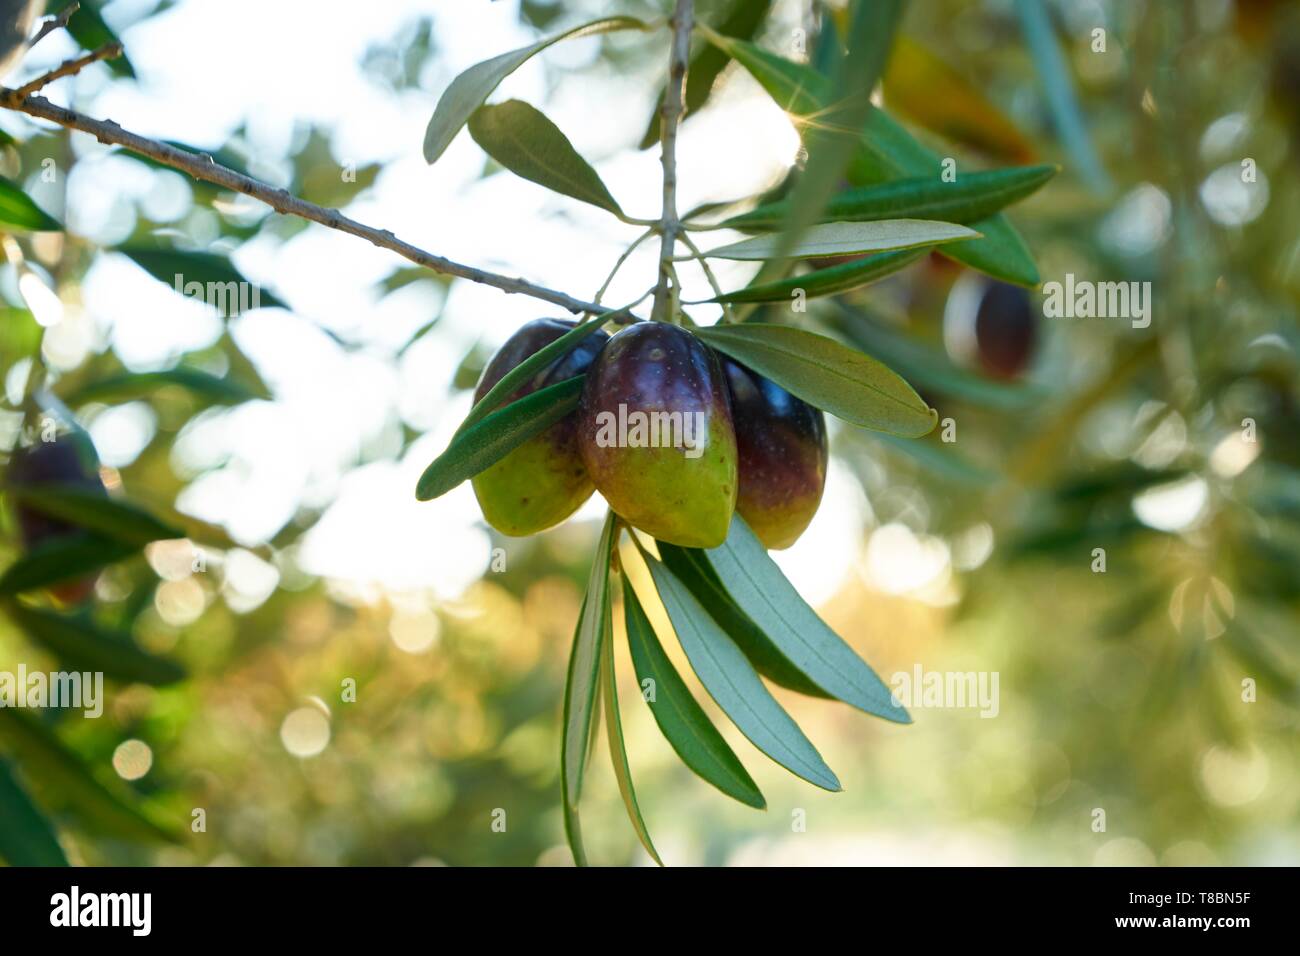 France, Aude, Caune Minervois, Farm, Jean Bernard Gieules, President of the Olive Lucque of Languedoc, olive grove Stock Photo